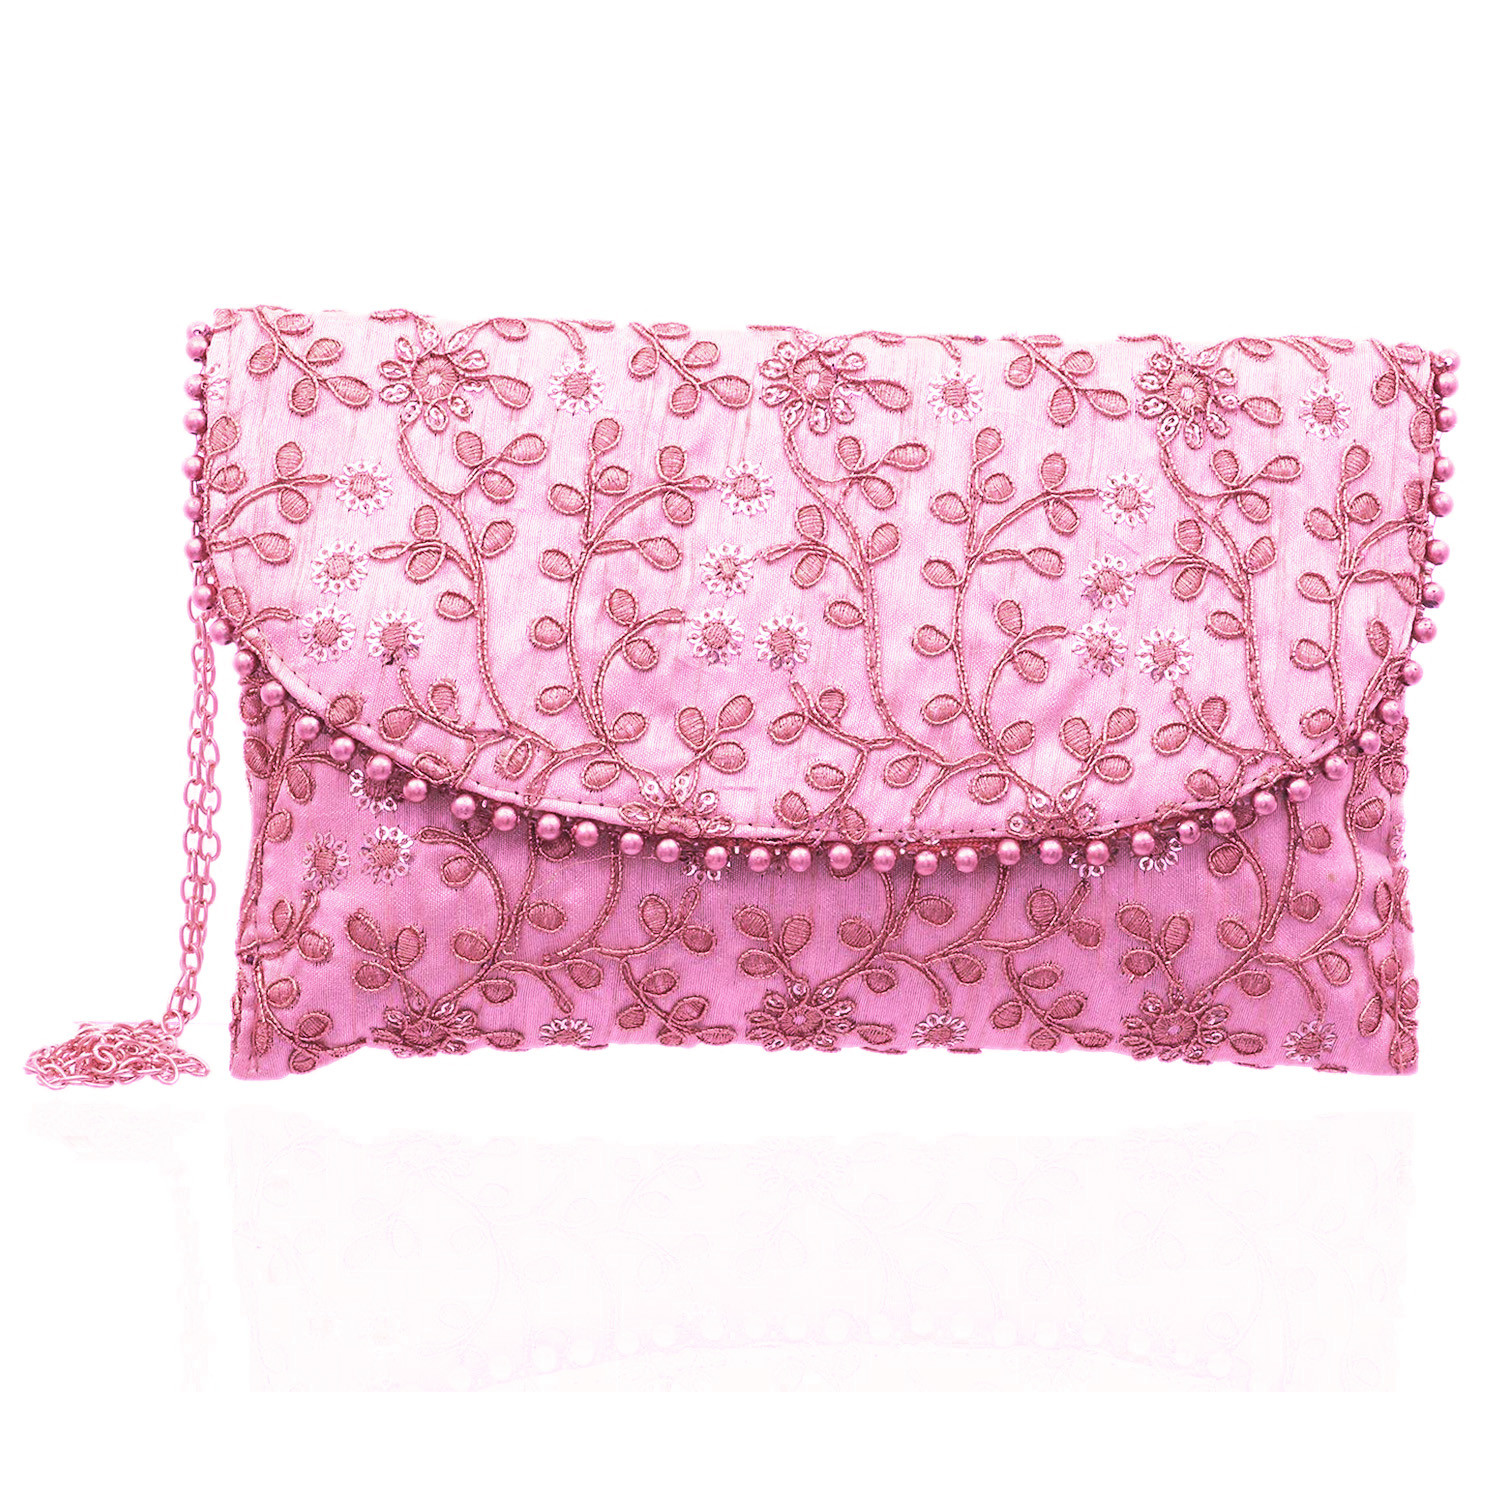 Kuber Industries Embroidery Golden Pearl Border Clutch|Hand Purse & Pearls Handle With Magnetic Lock For Woman,Girls (Pink)